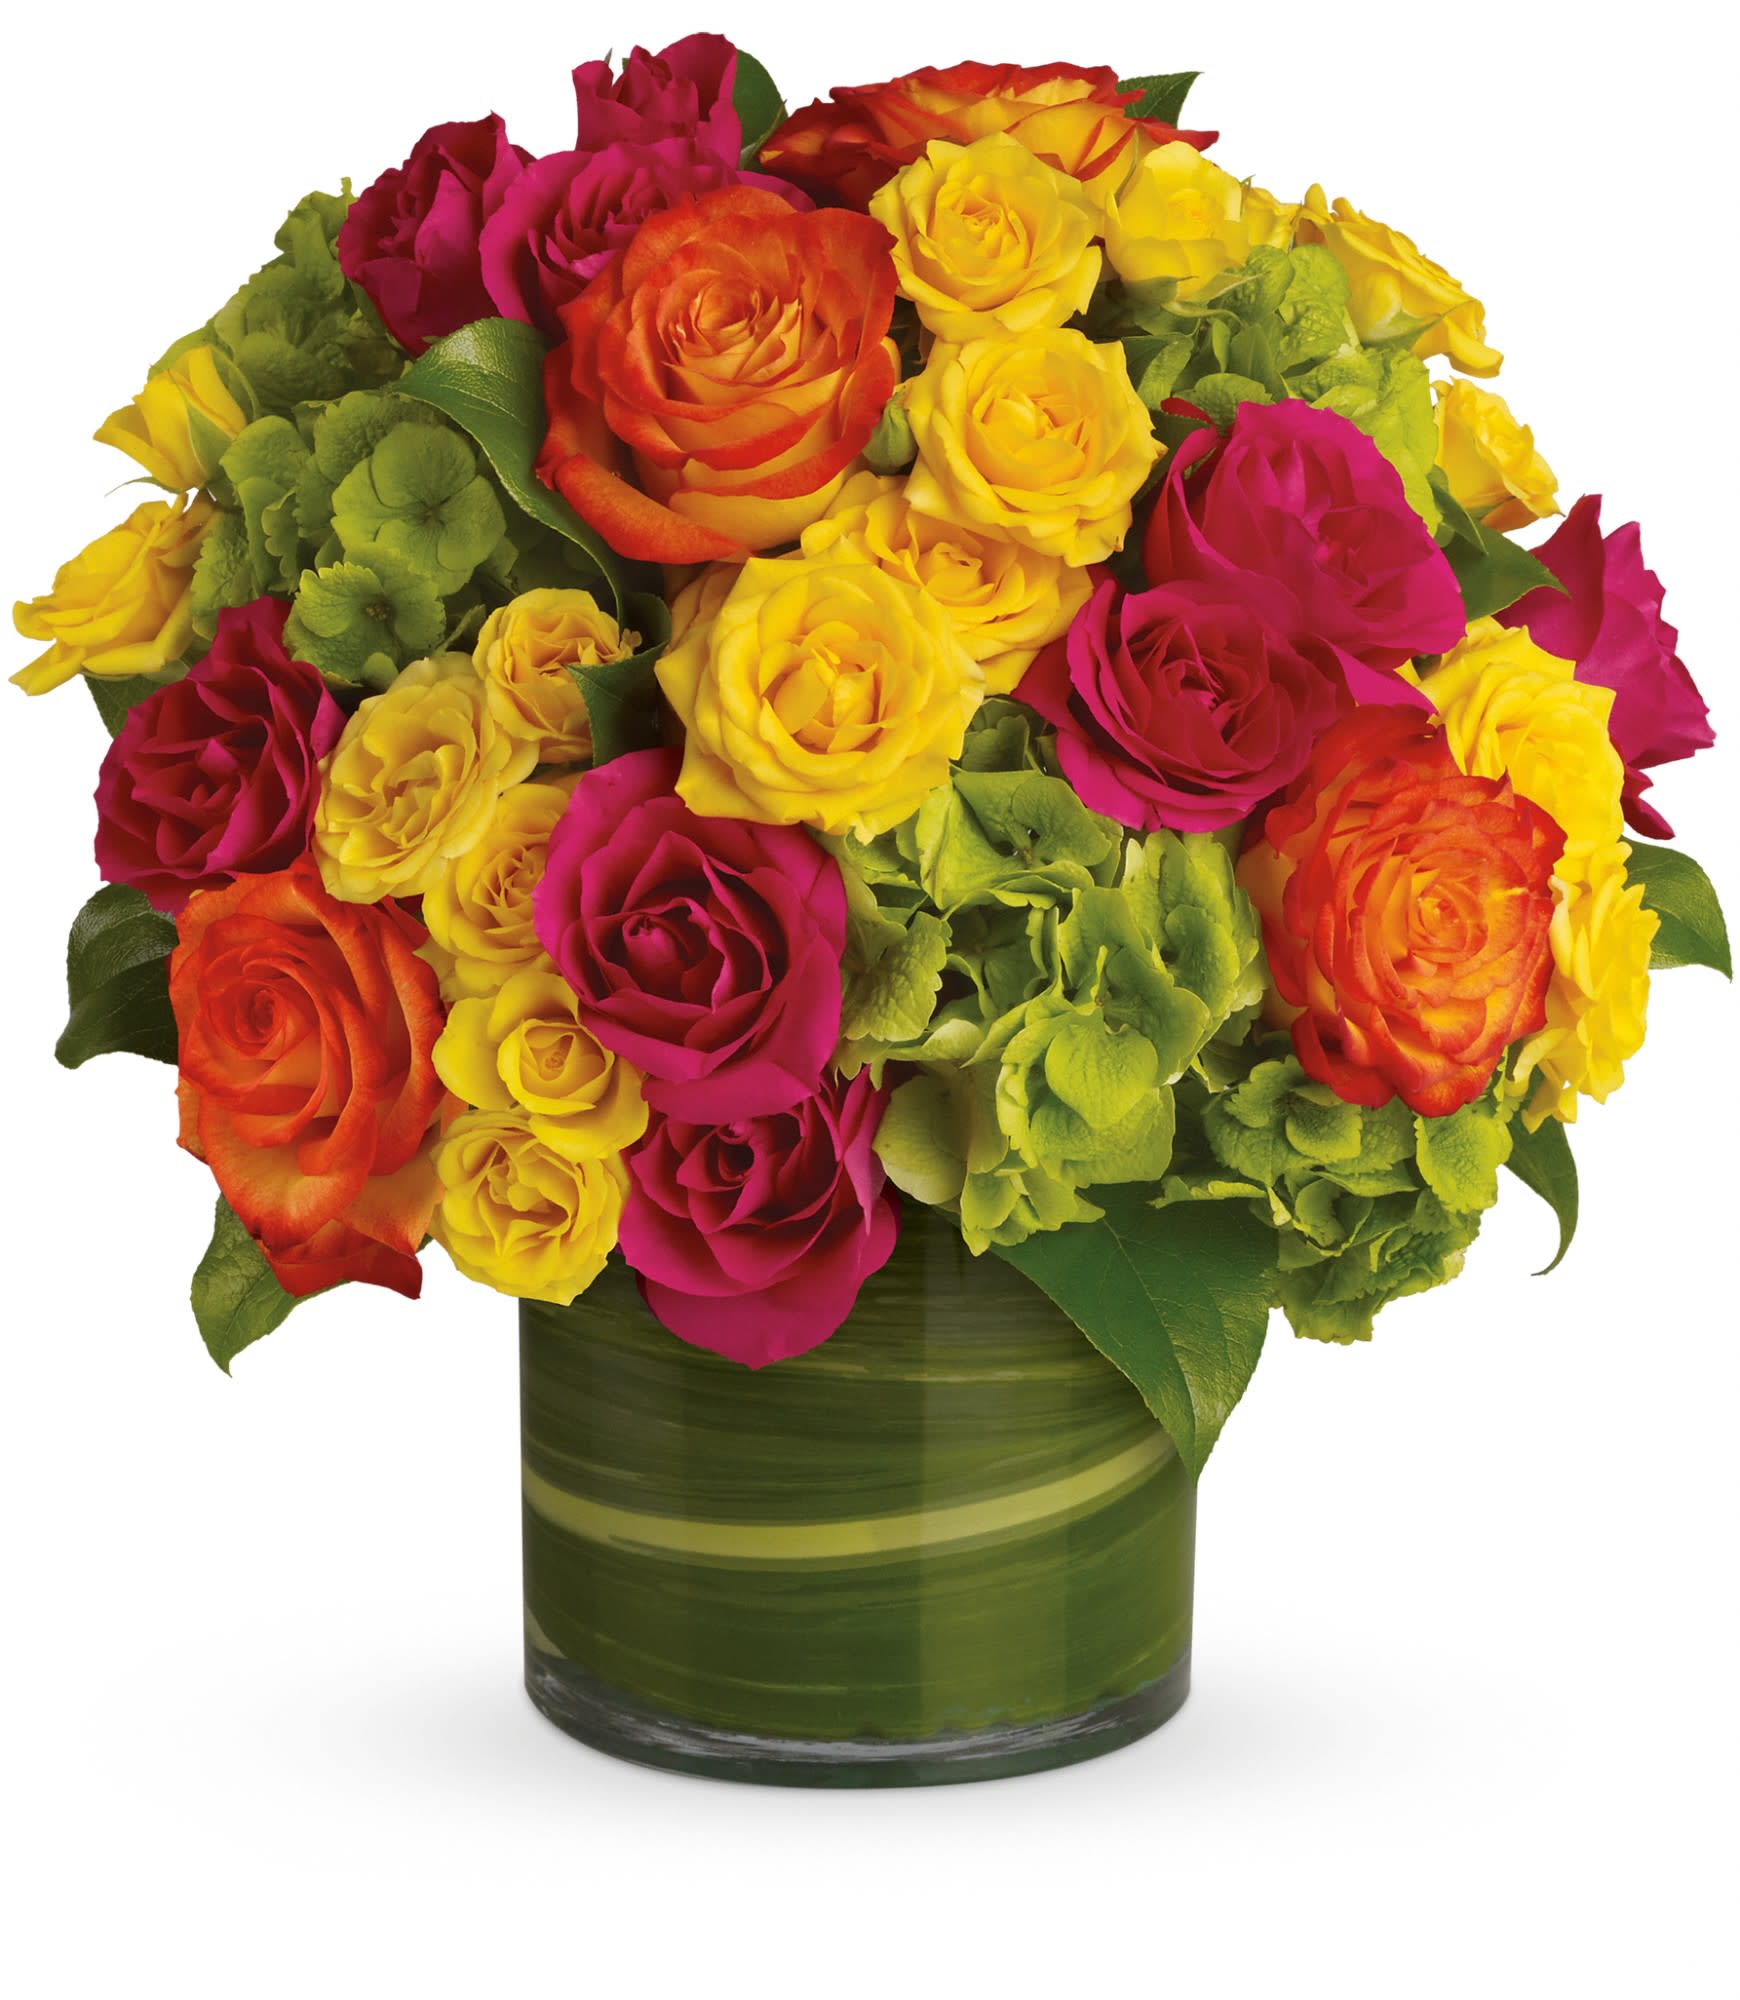 Blossoms in Vogue - High-fashion flowers for the style-minded! This modern presentation of multicolored roses and green hydrangea has a tropical feel thanks to the hot color palette and the aspidistra leaves in the vase. Bright green hydrangea and rich green salal leaves mix with hot pink, yellow, and orange bi-color roses in a clear glass cylinder that's lined with variegated aspidistra leaves.